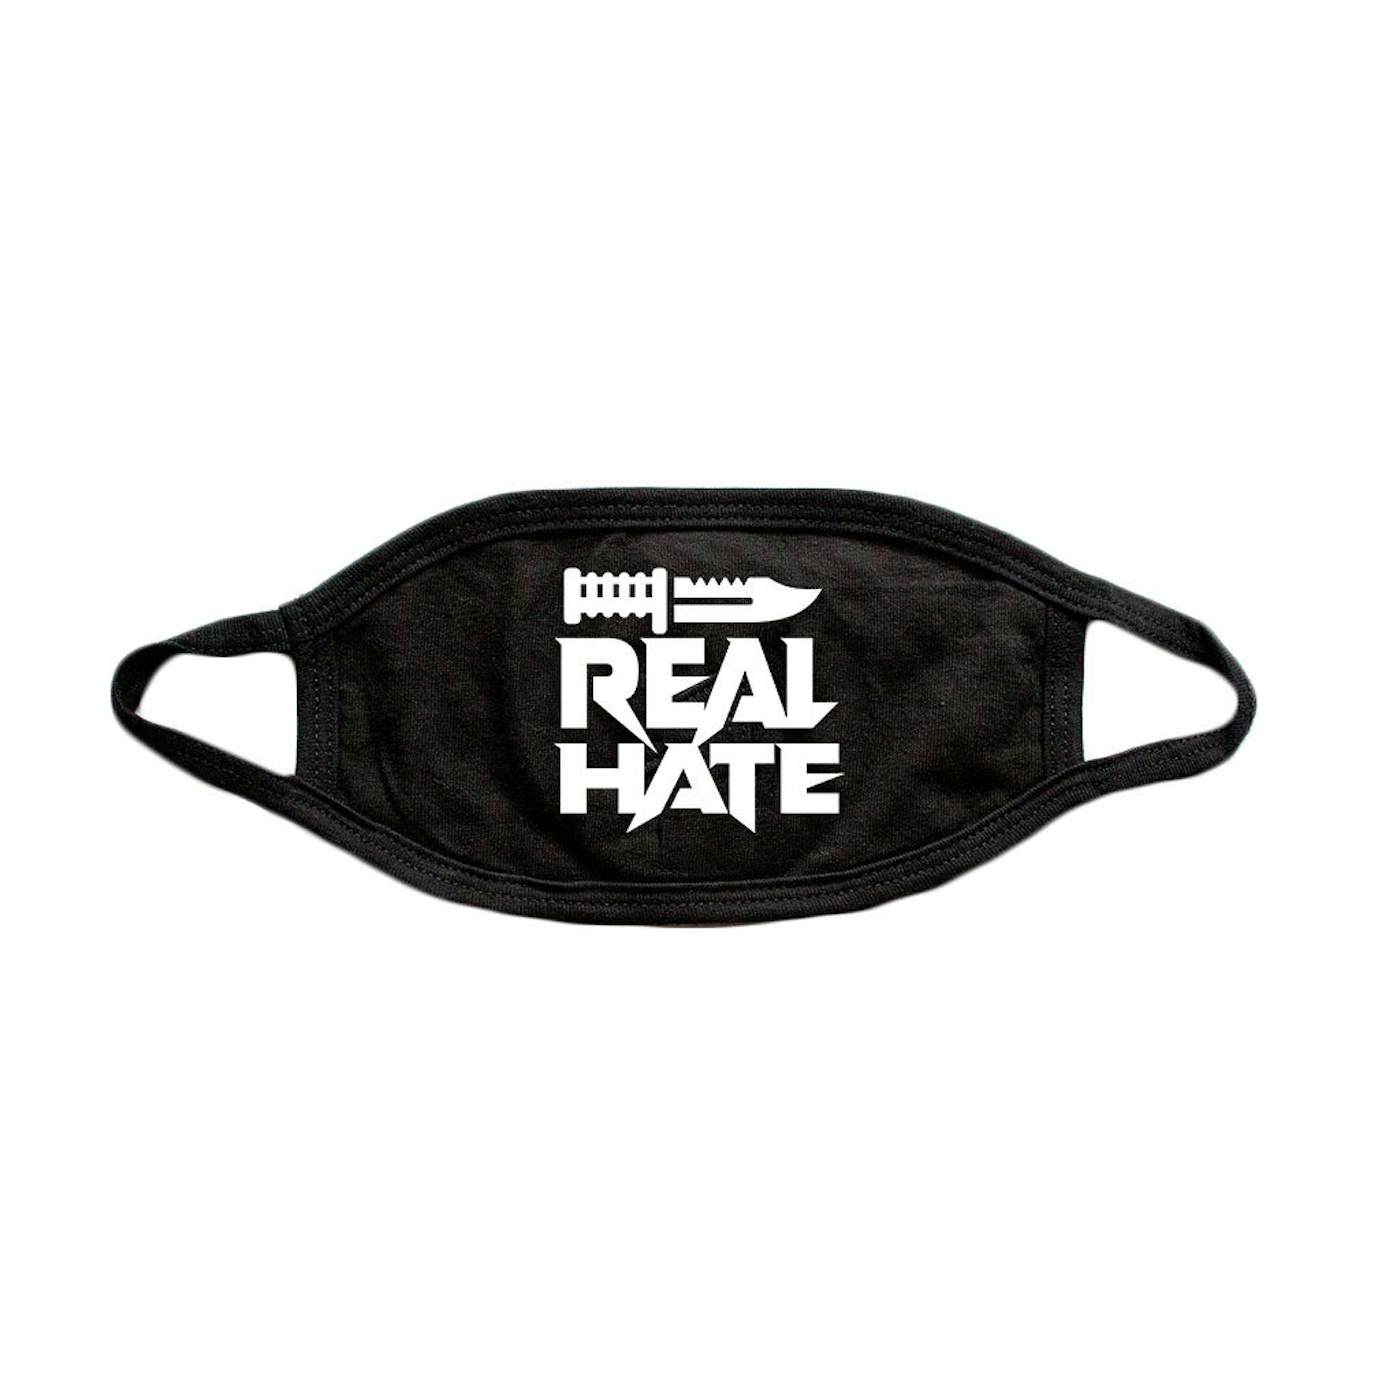 Philthy Rich - Real Hate - Knife Black Mask + DL